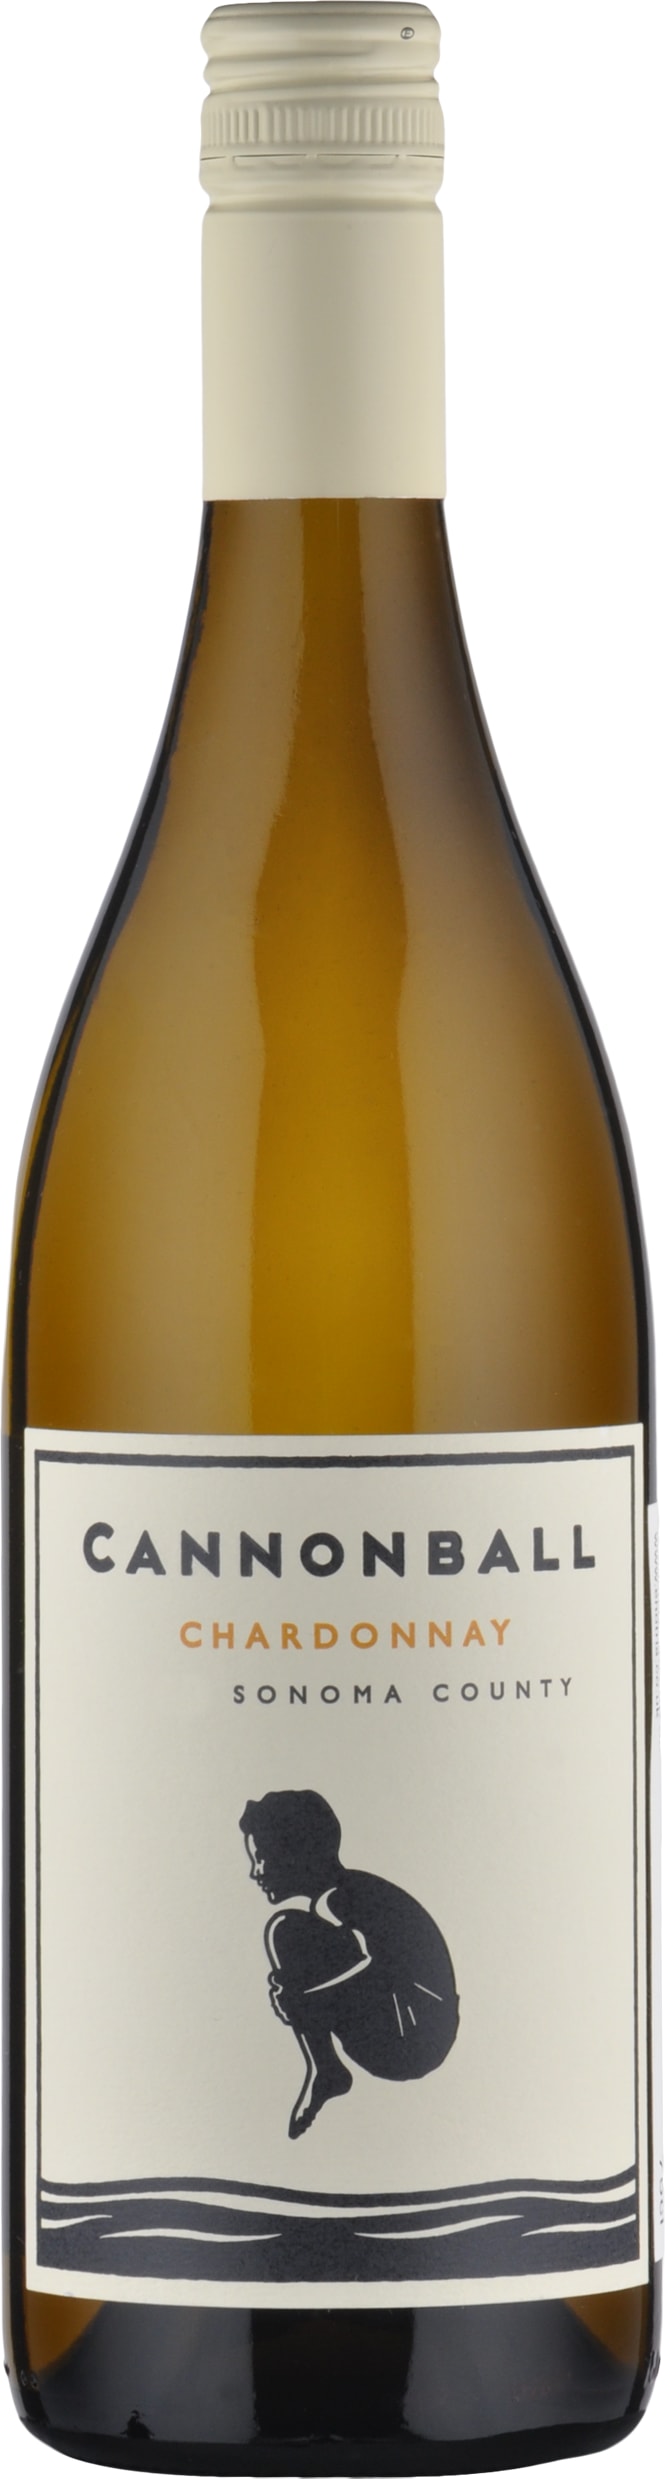 Cannonball Chardonnay 2021 75cl - Buy Cannonball Wines from GREAT WINES DIRECT wine shop